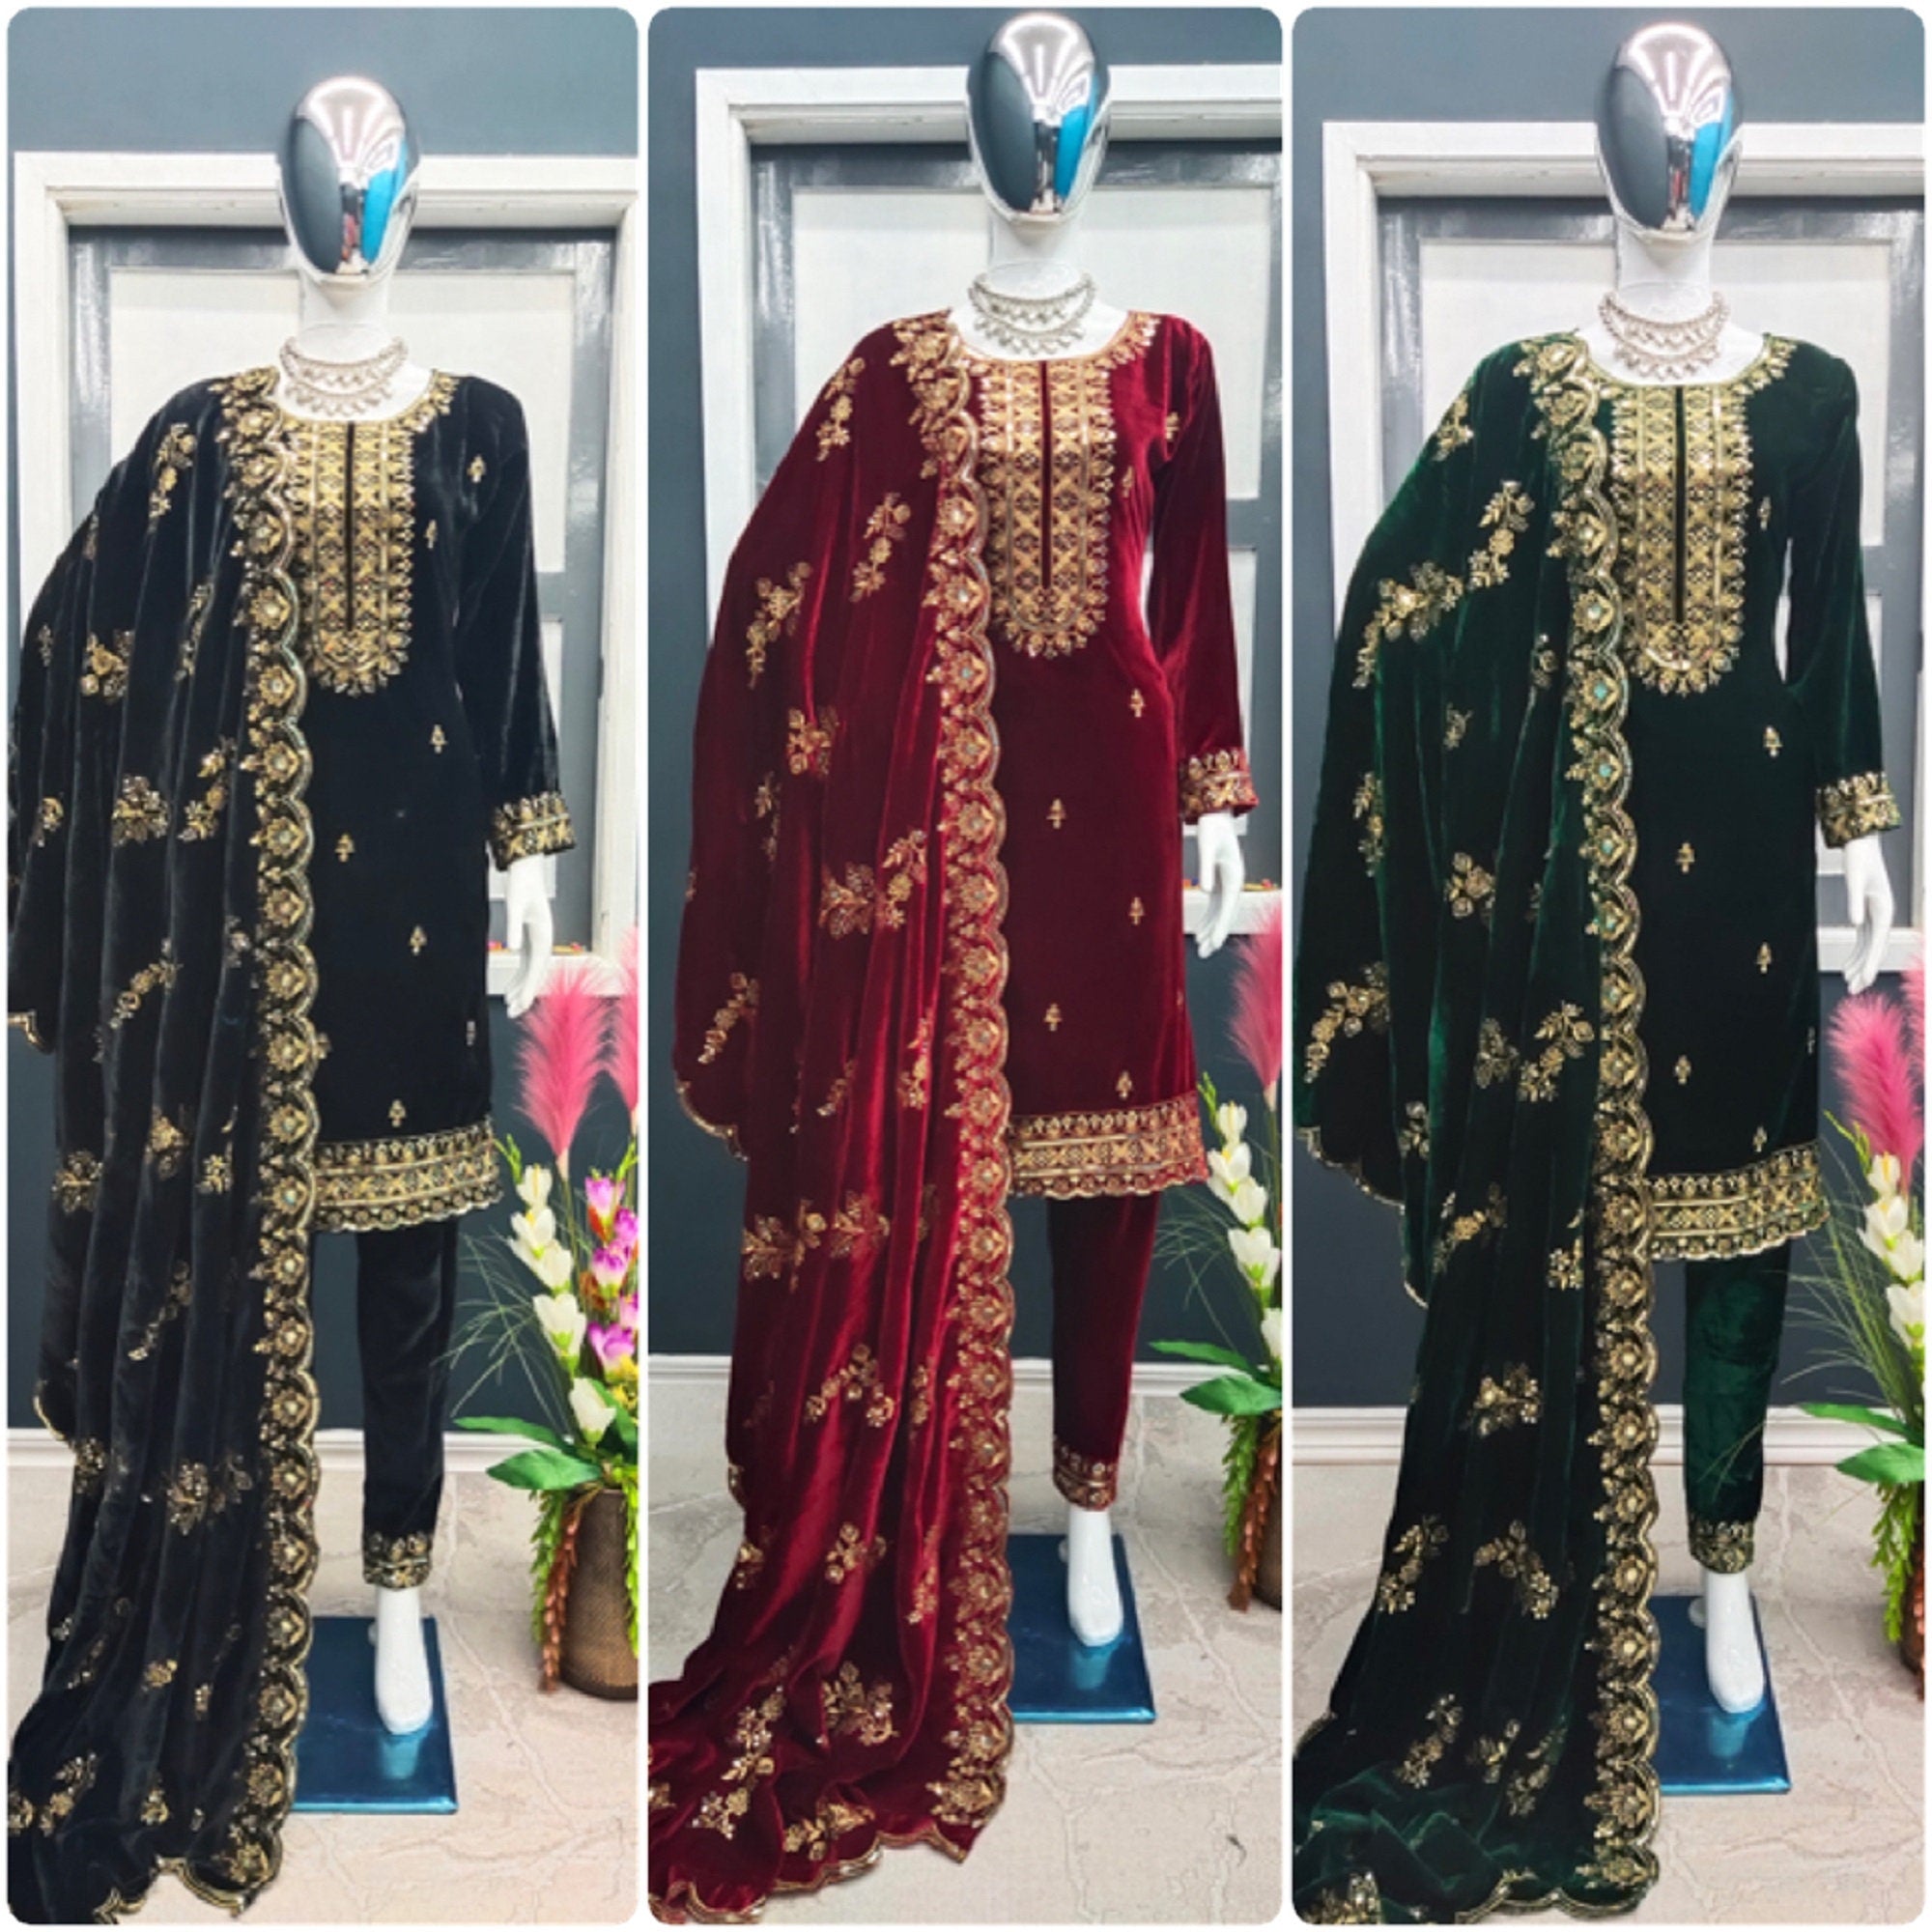 Velvet Indian Suits - Free Shipping on Designer Velvet Indian Clothes  Online in USA | Page 2